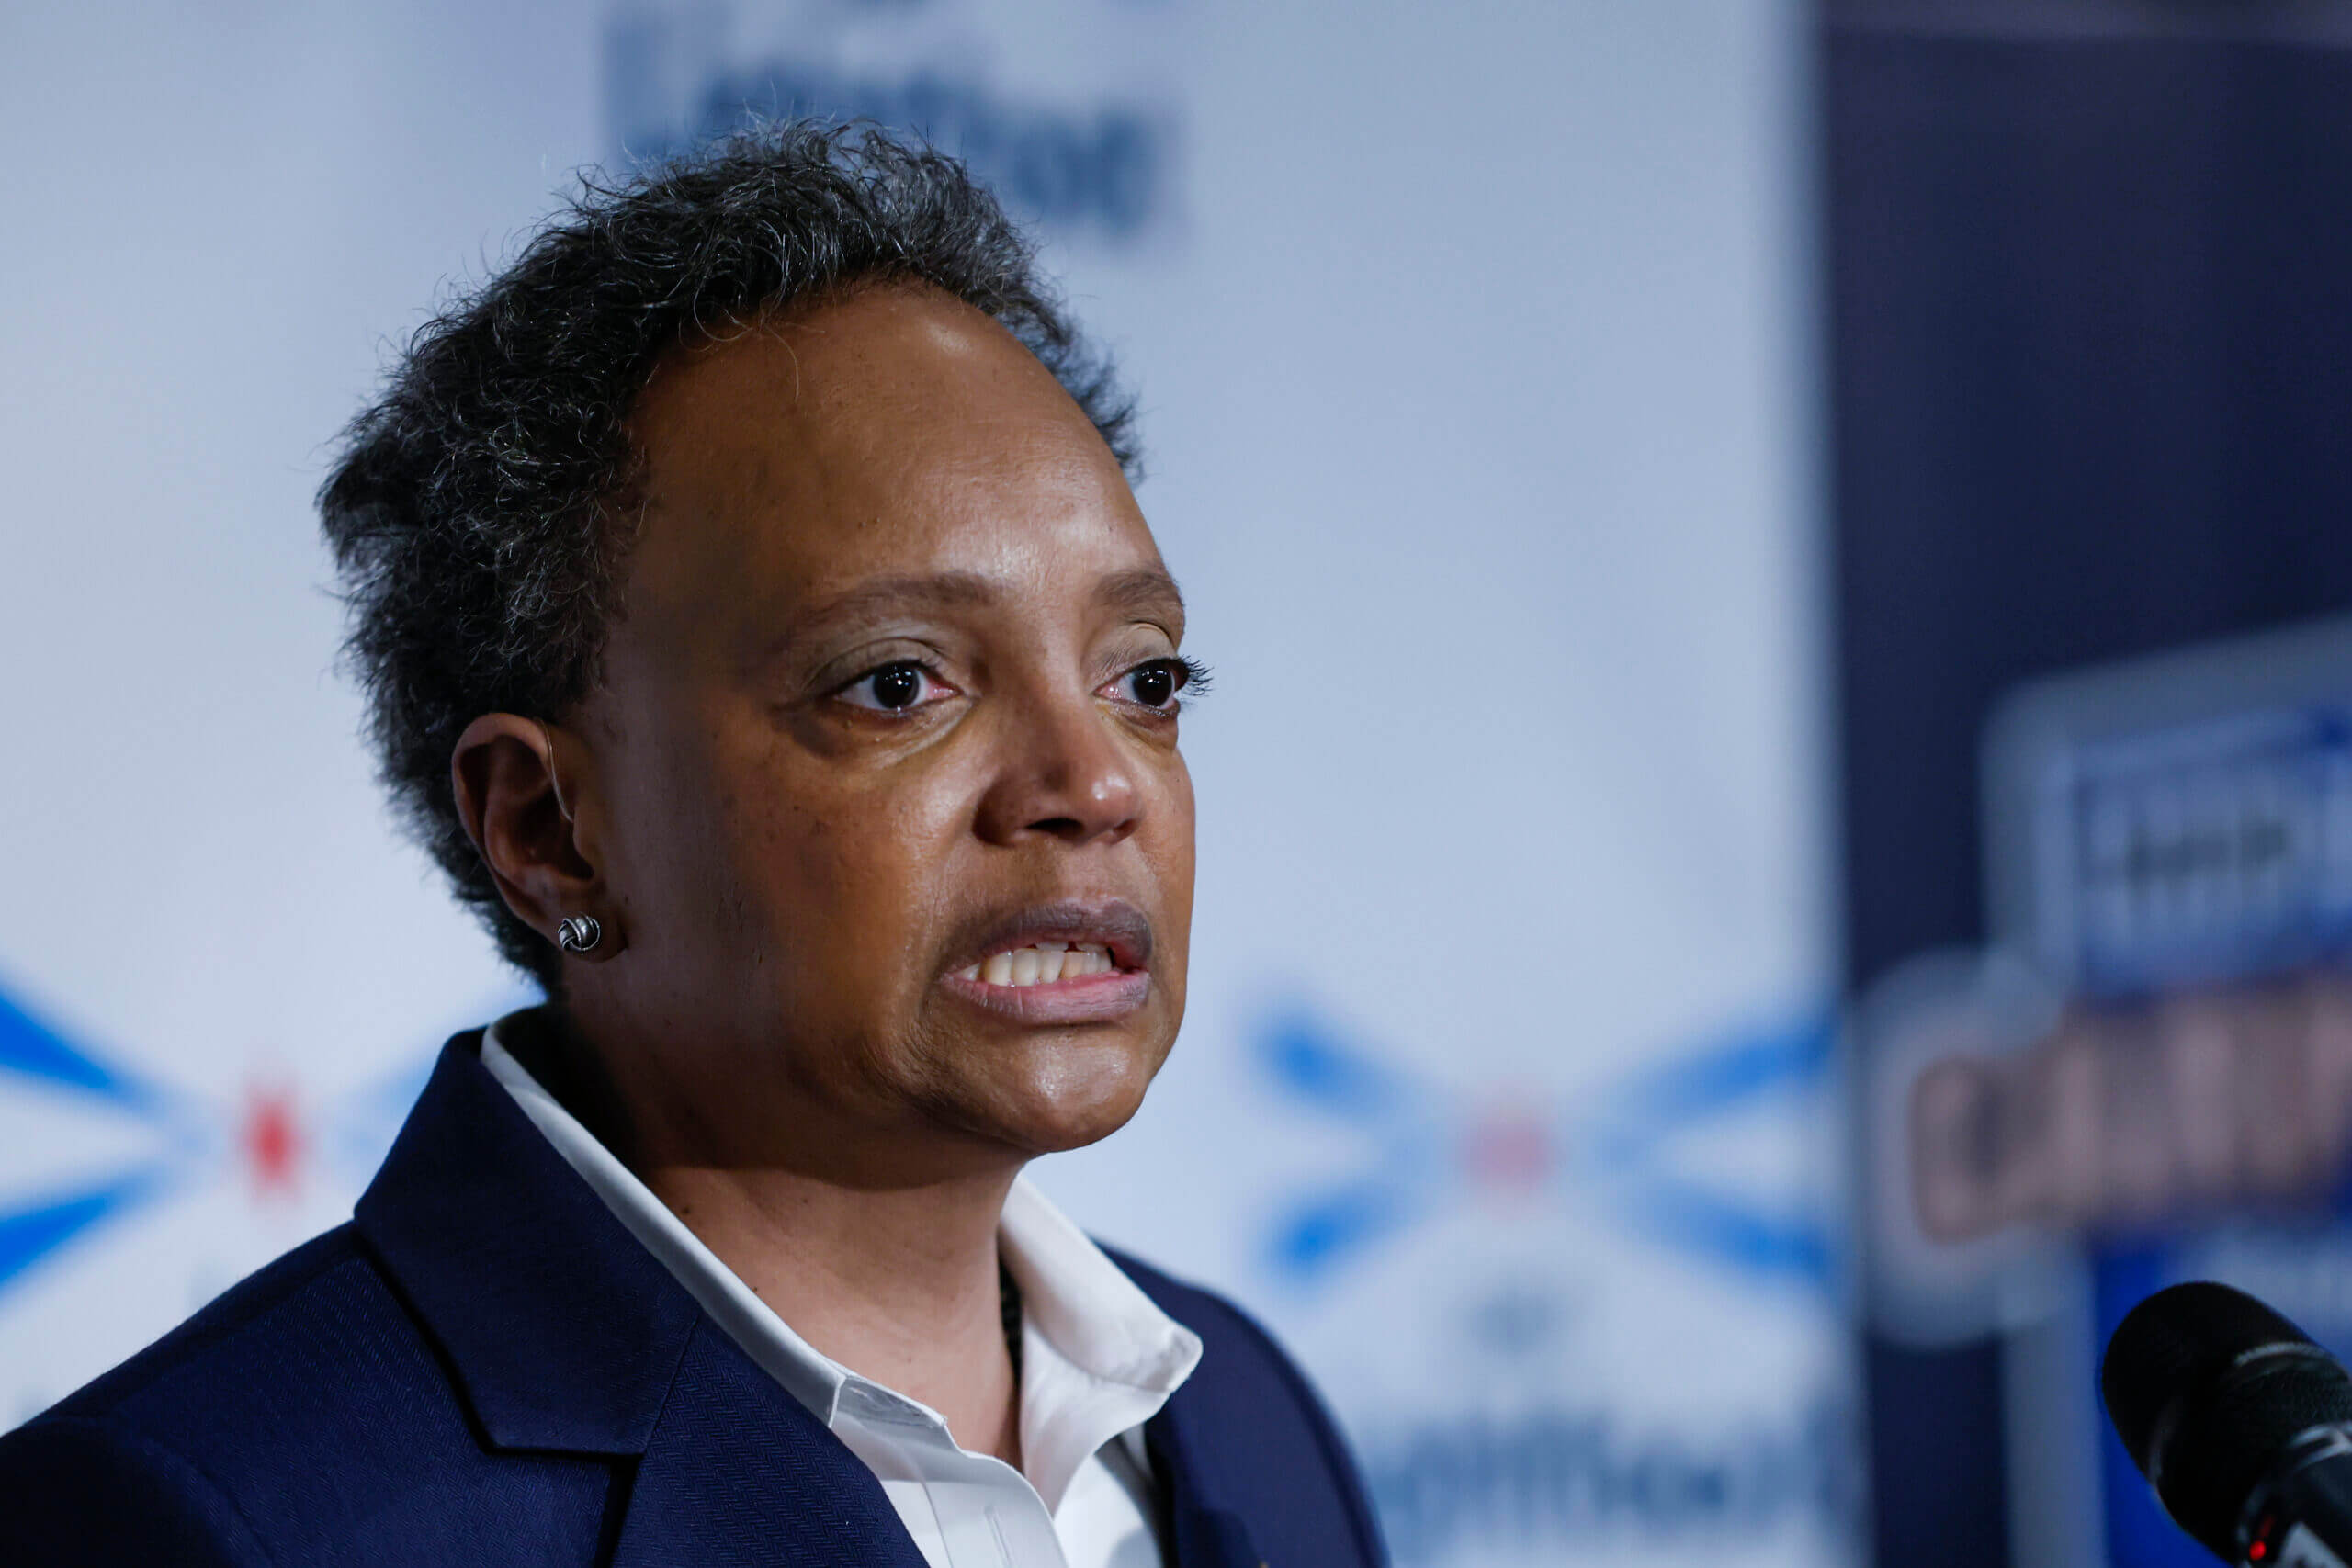 Morning Greatness: Chicago Ousts Lori Lightfoot